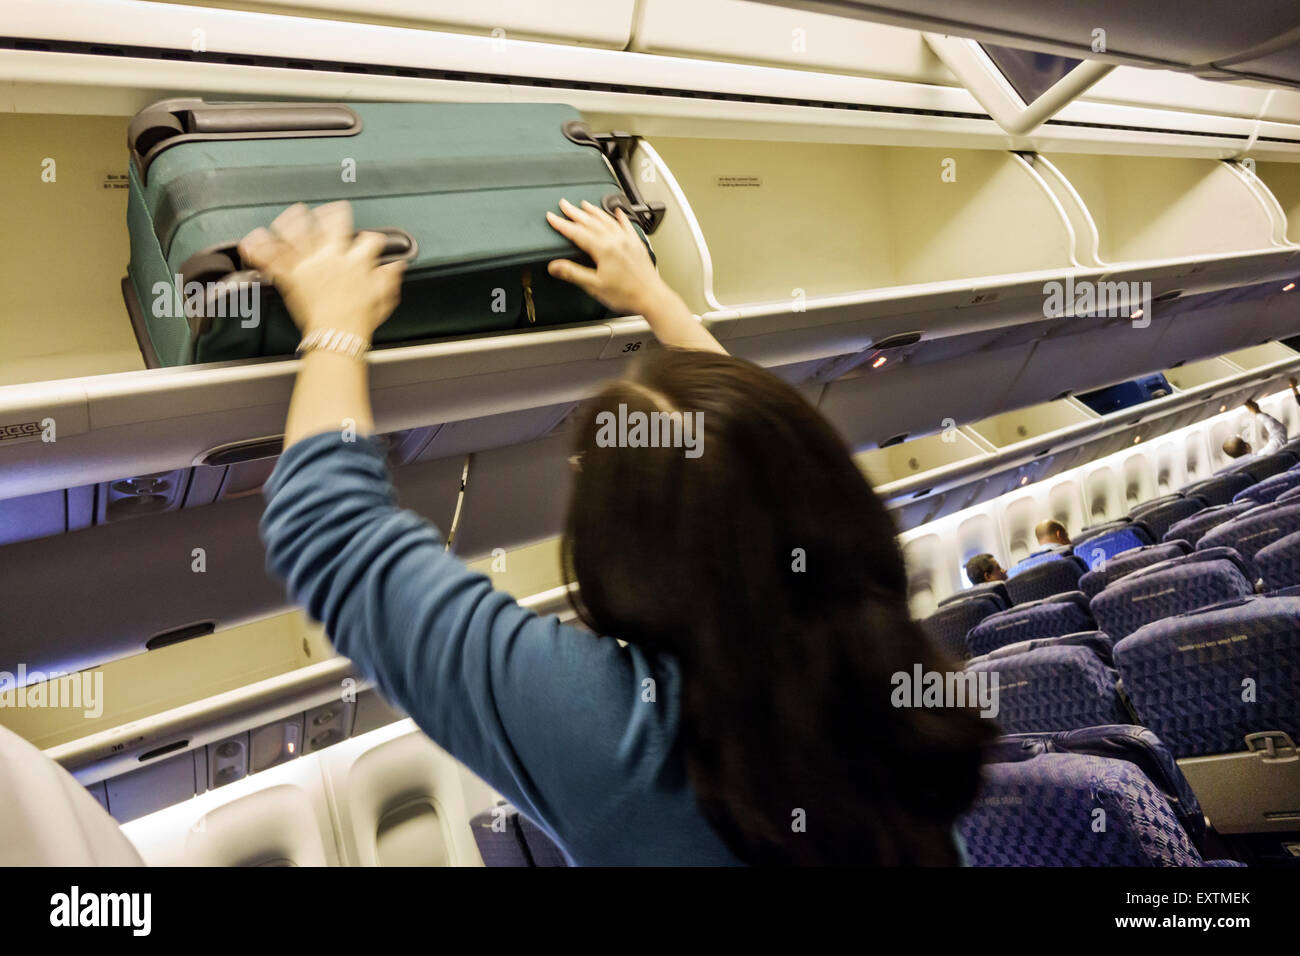 Dallas Texas,Dallas Ft. Fort Worth International Airport,DFW,American Airlines,aircraft,cabin,boarding,departure,overhead bin,stowing bag,passenger pa Stock Photo